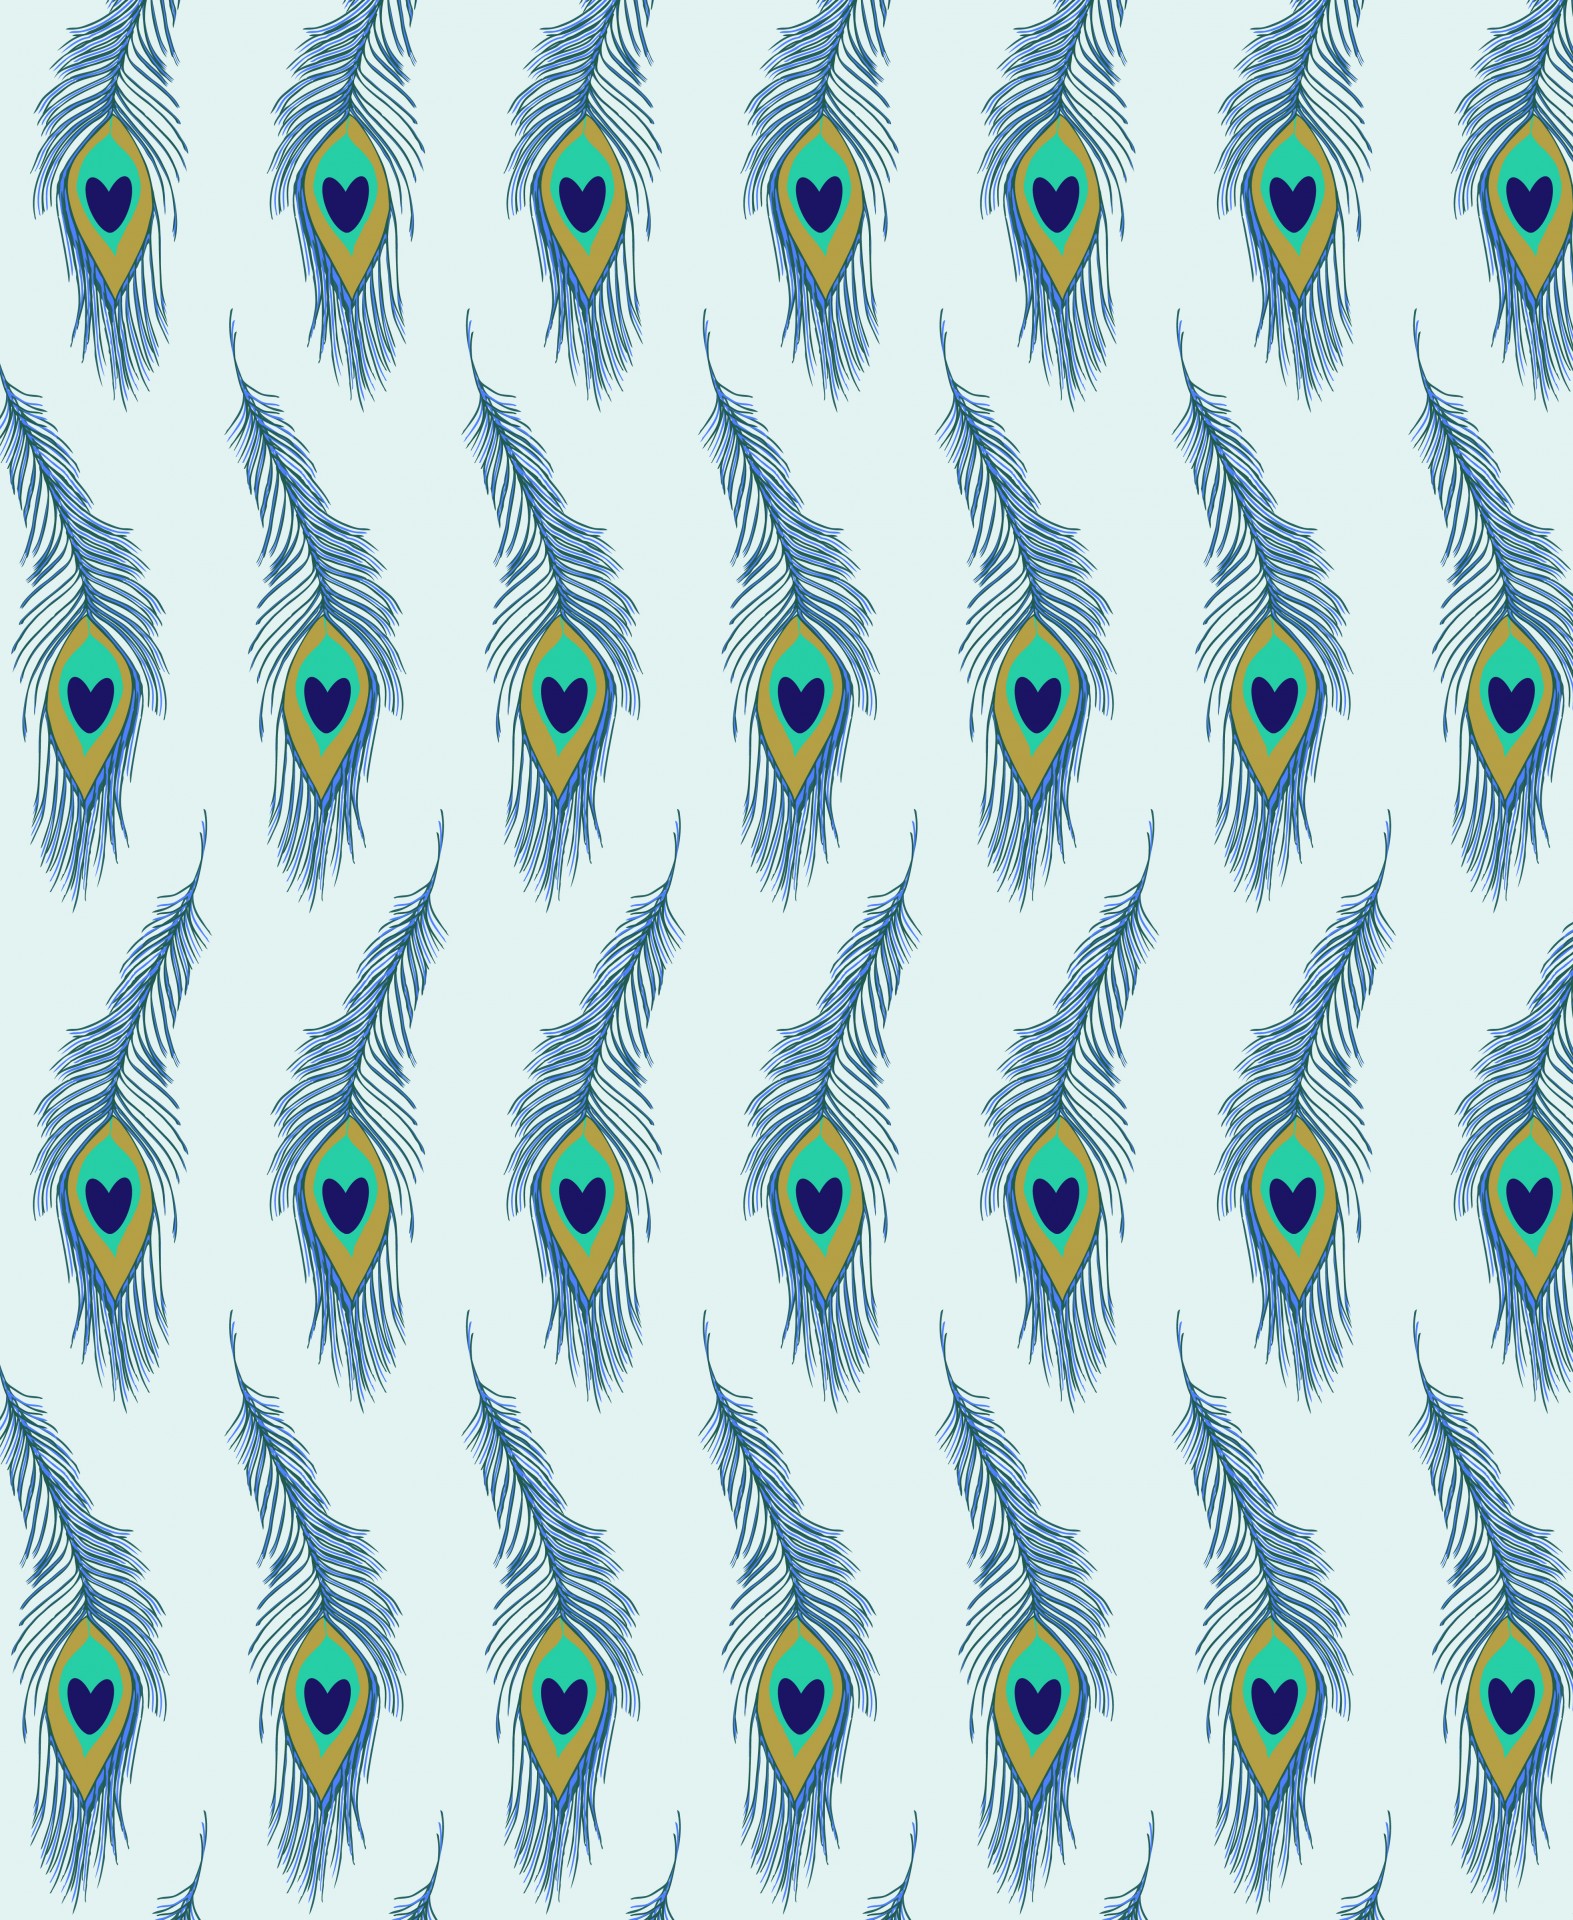 Peacock Feathers Background